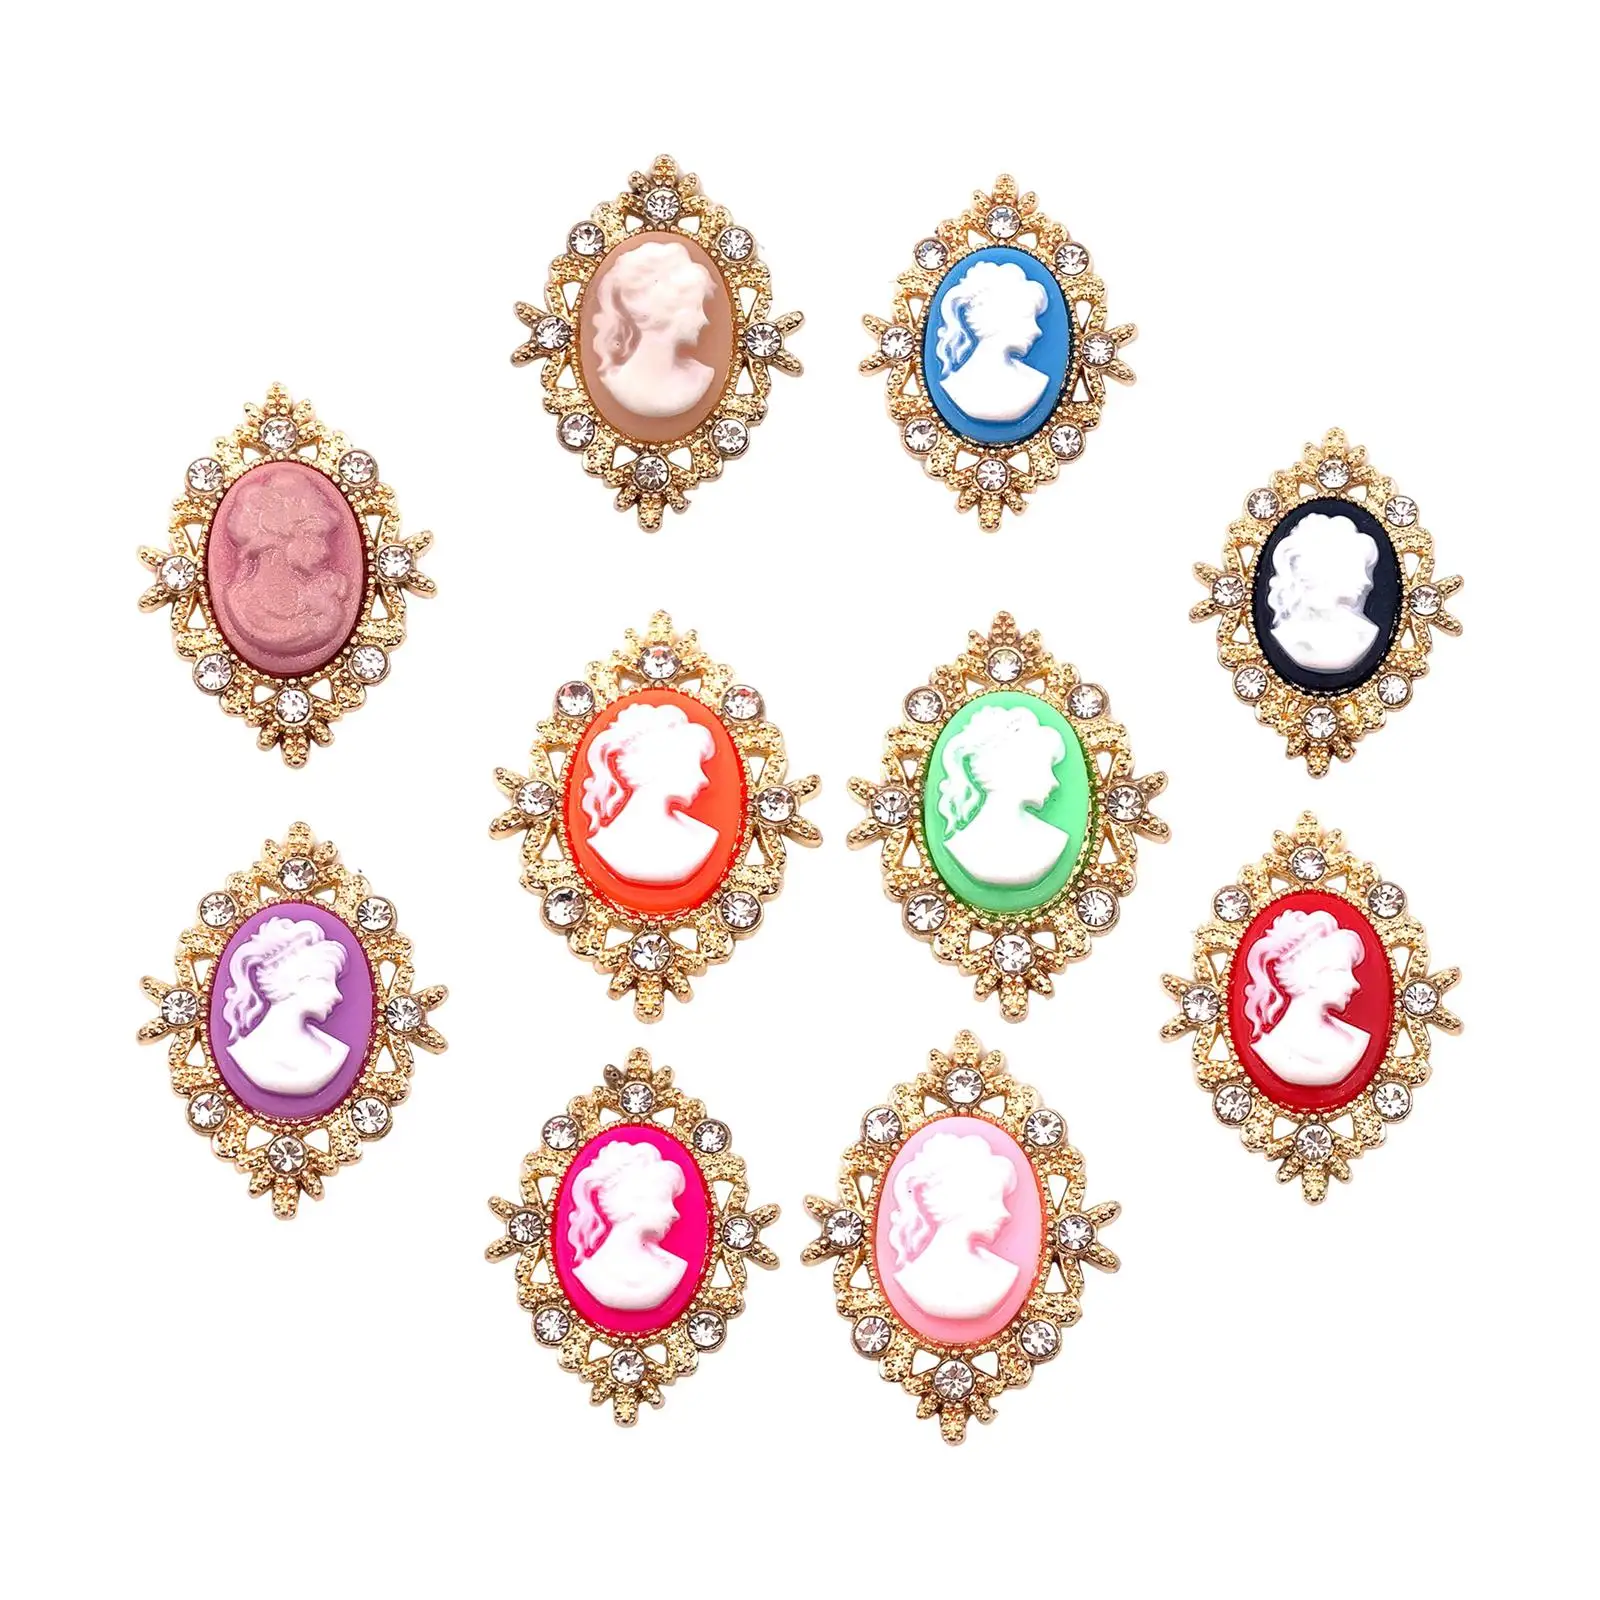 10Pcs Bling Flat Back Buttons Decorative Pendant Alloy Embellishments for Sewing DIY Apparel Accessories Wedding Scrapbook